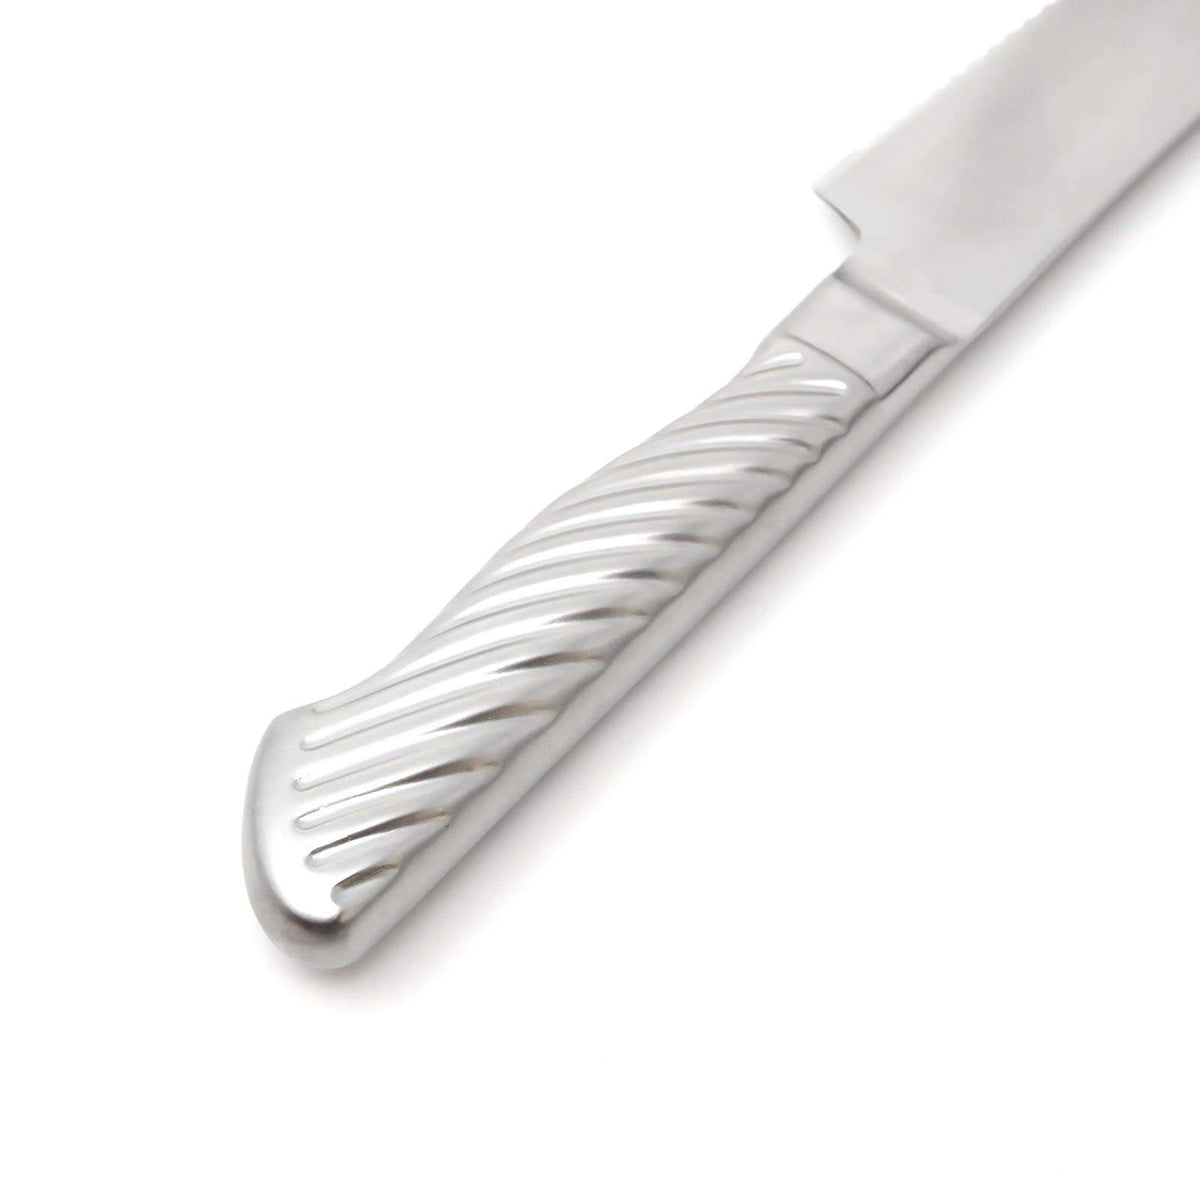 Tojiro Fujitora SD Bread Knife with Stainless Steel Handle 215mm FU-629 Bread Knives